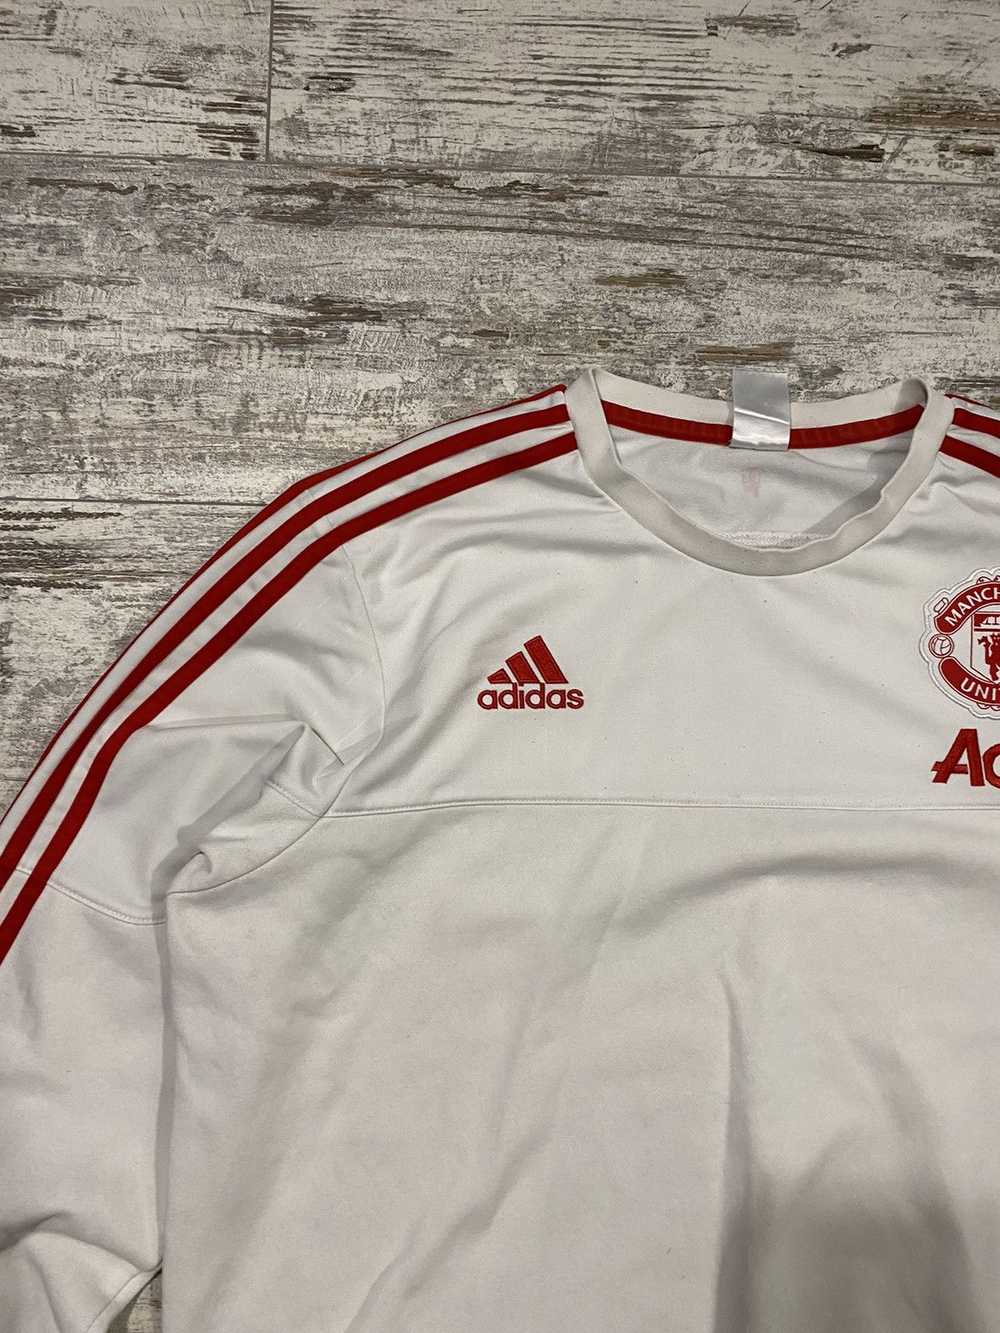 Adidas × Manchester United × Soccer Jersey VINTAG… - image 6